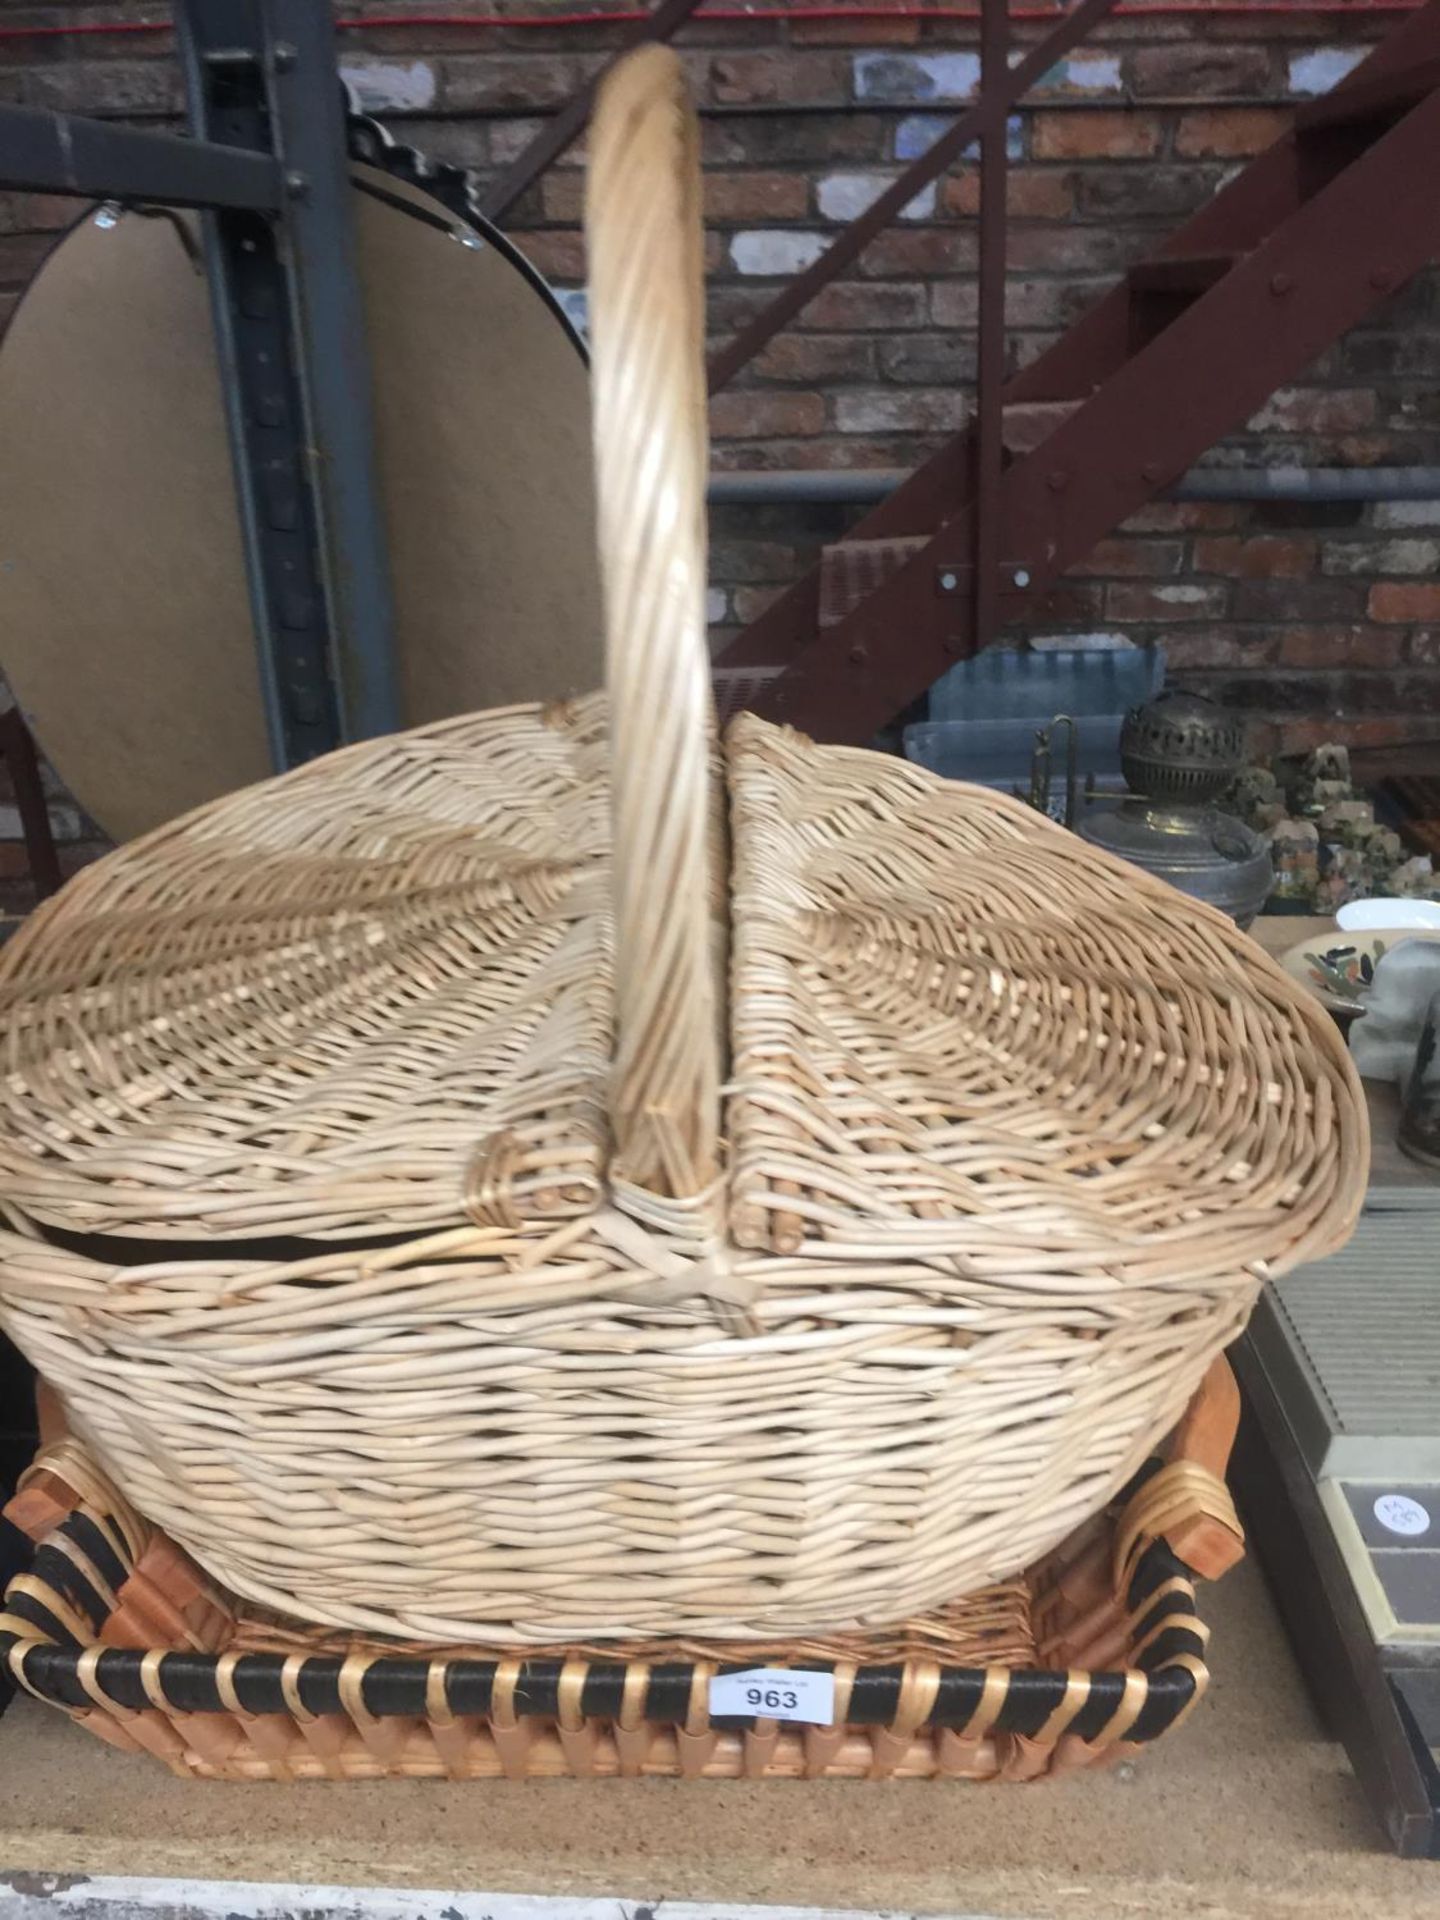 TWO WICKER BASKETS, ONE WITH A LID